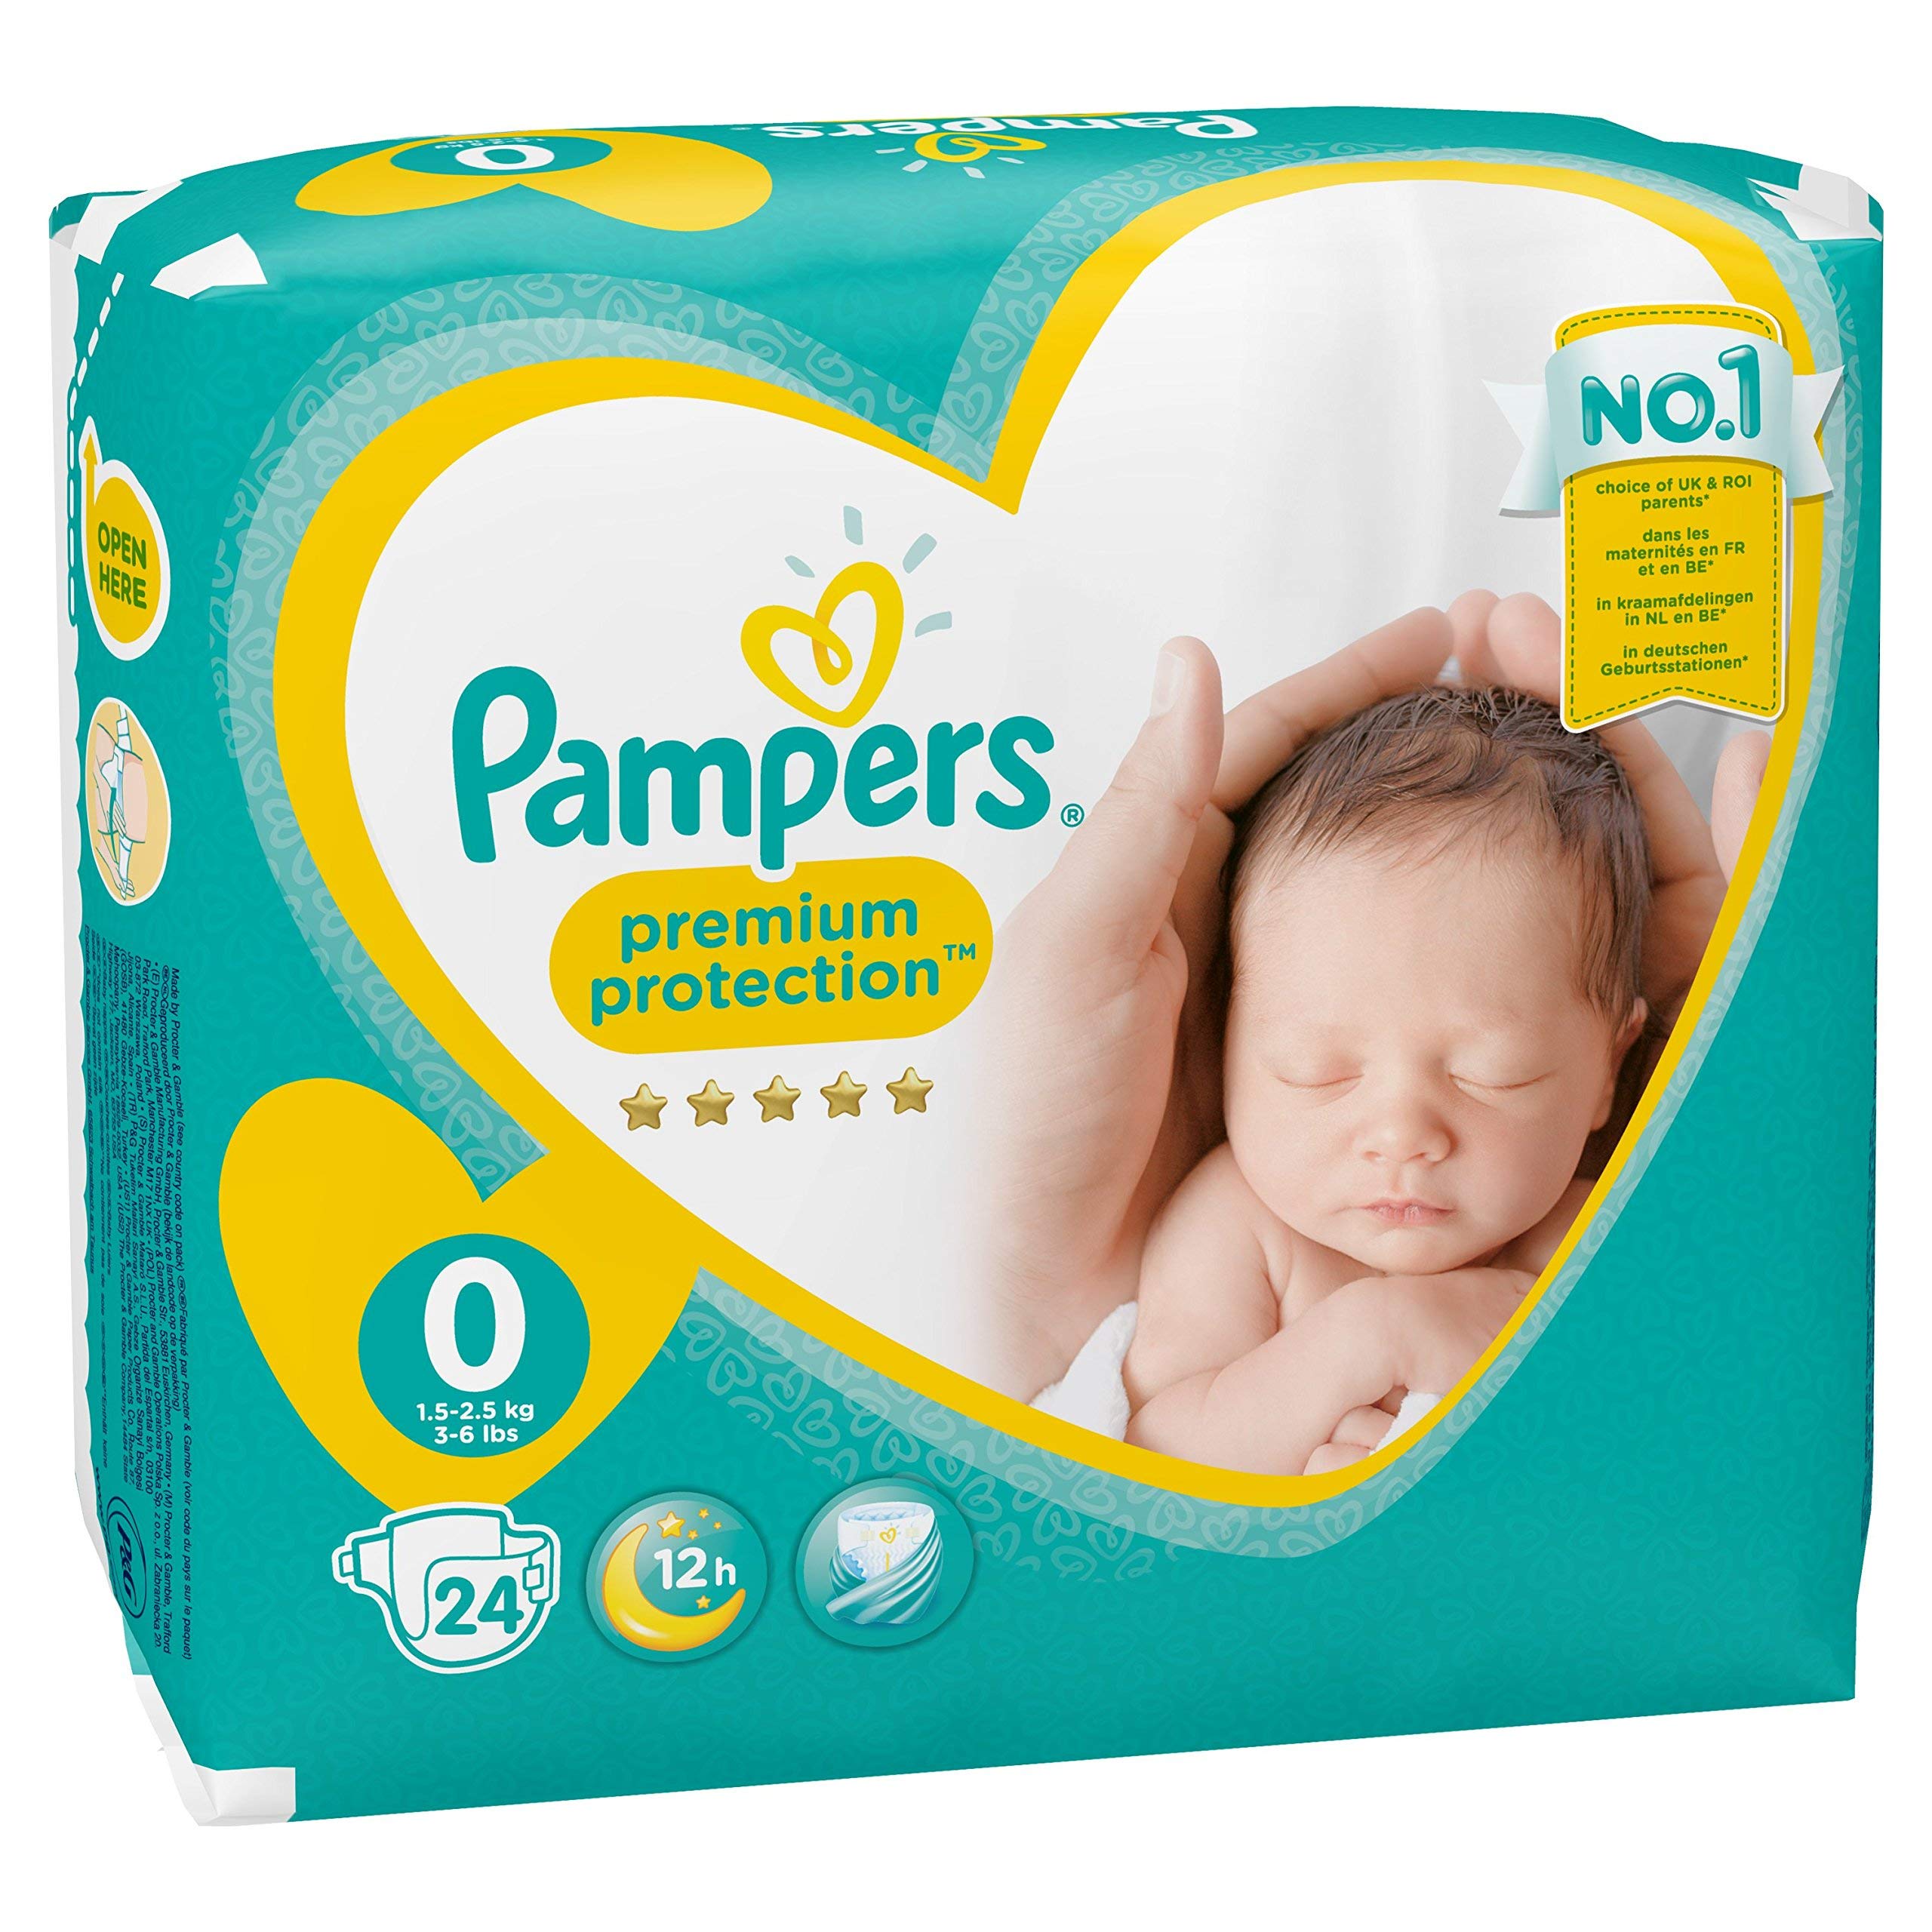 pampers new baby maat 0